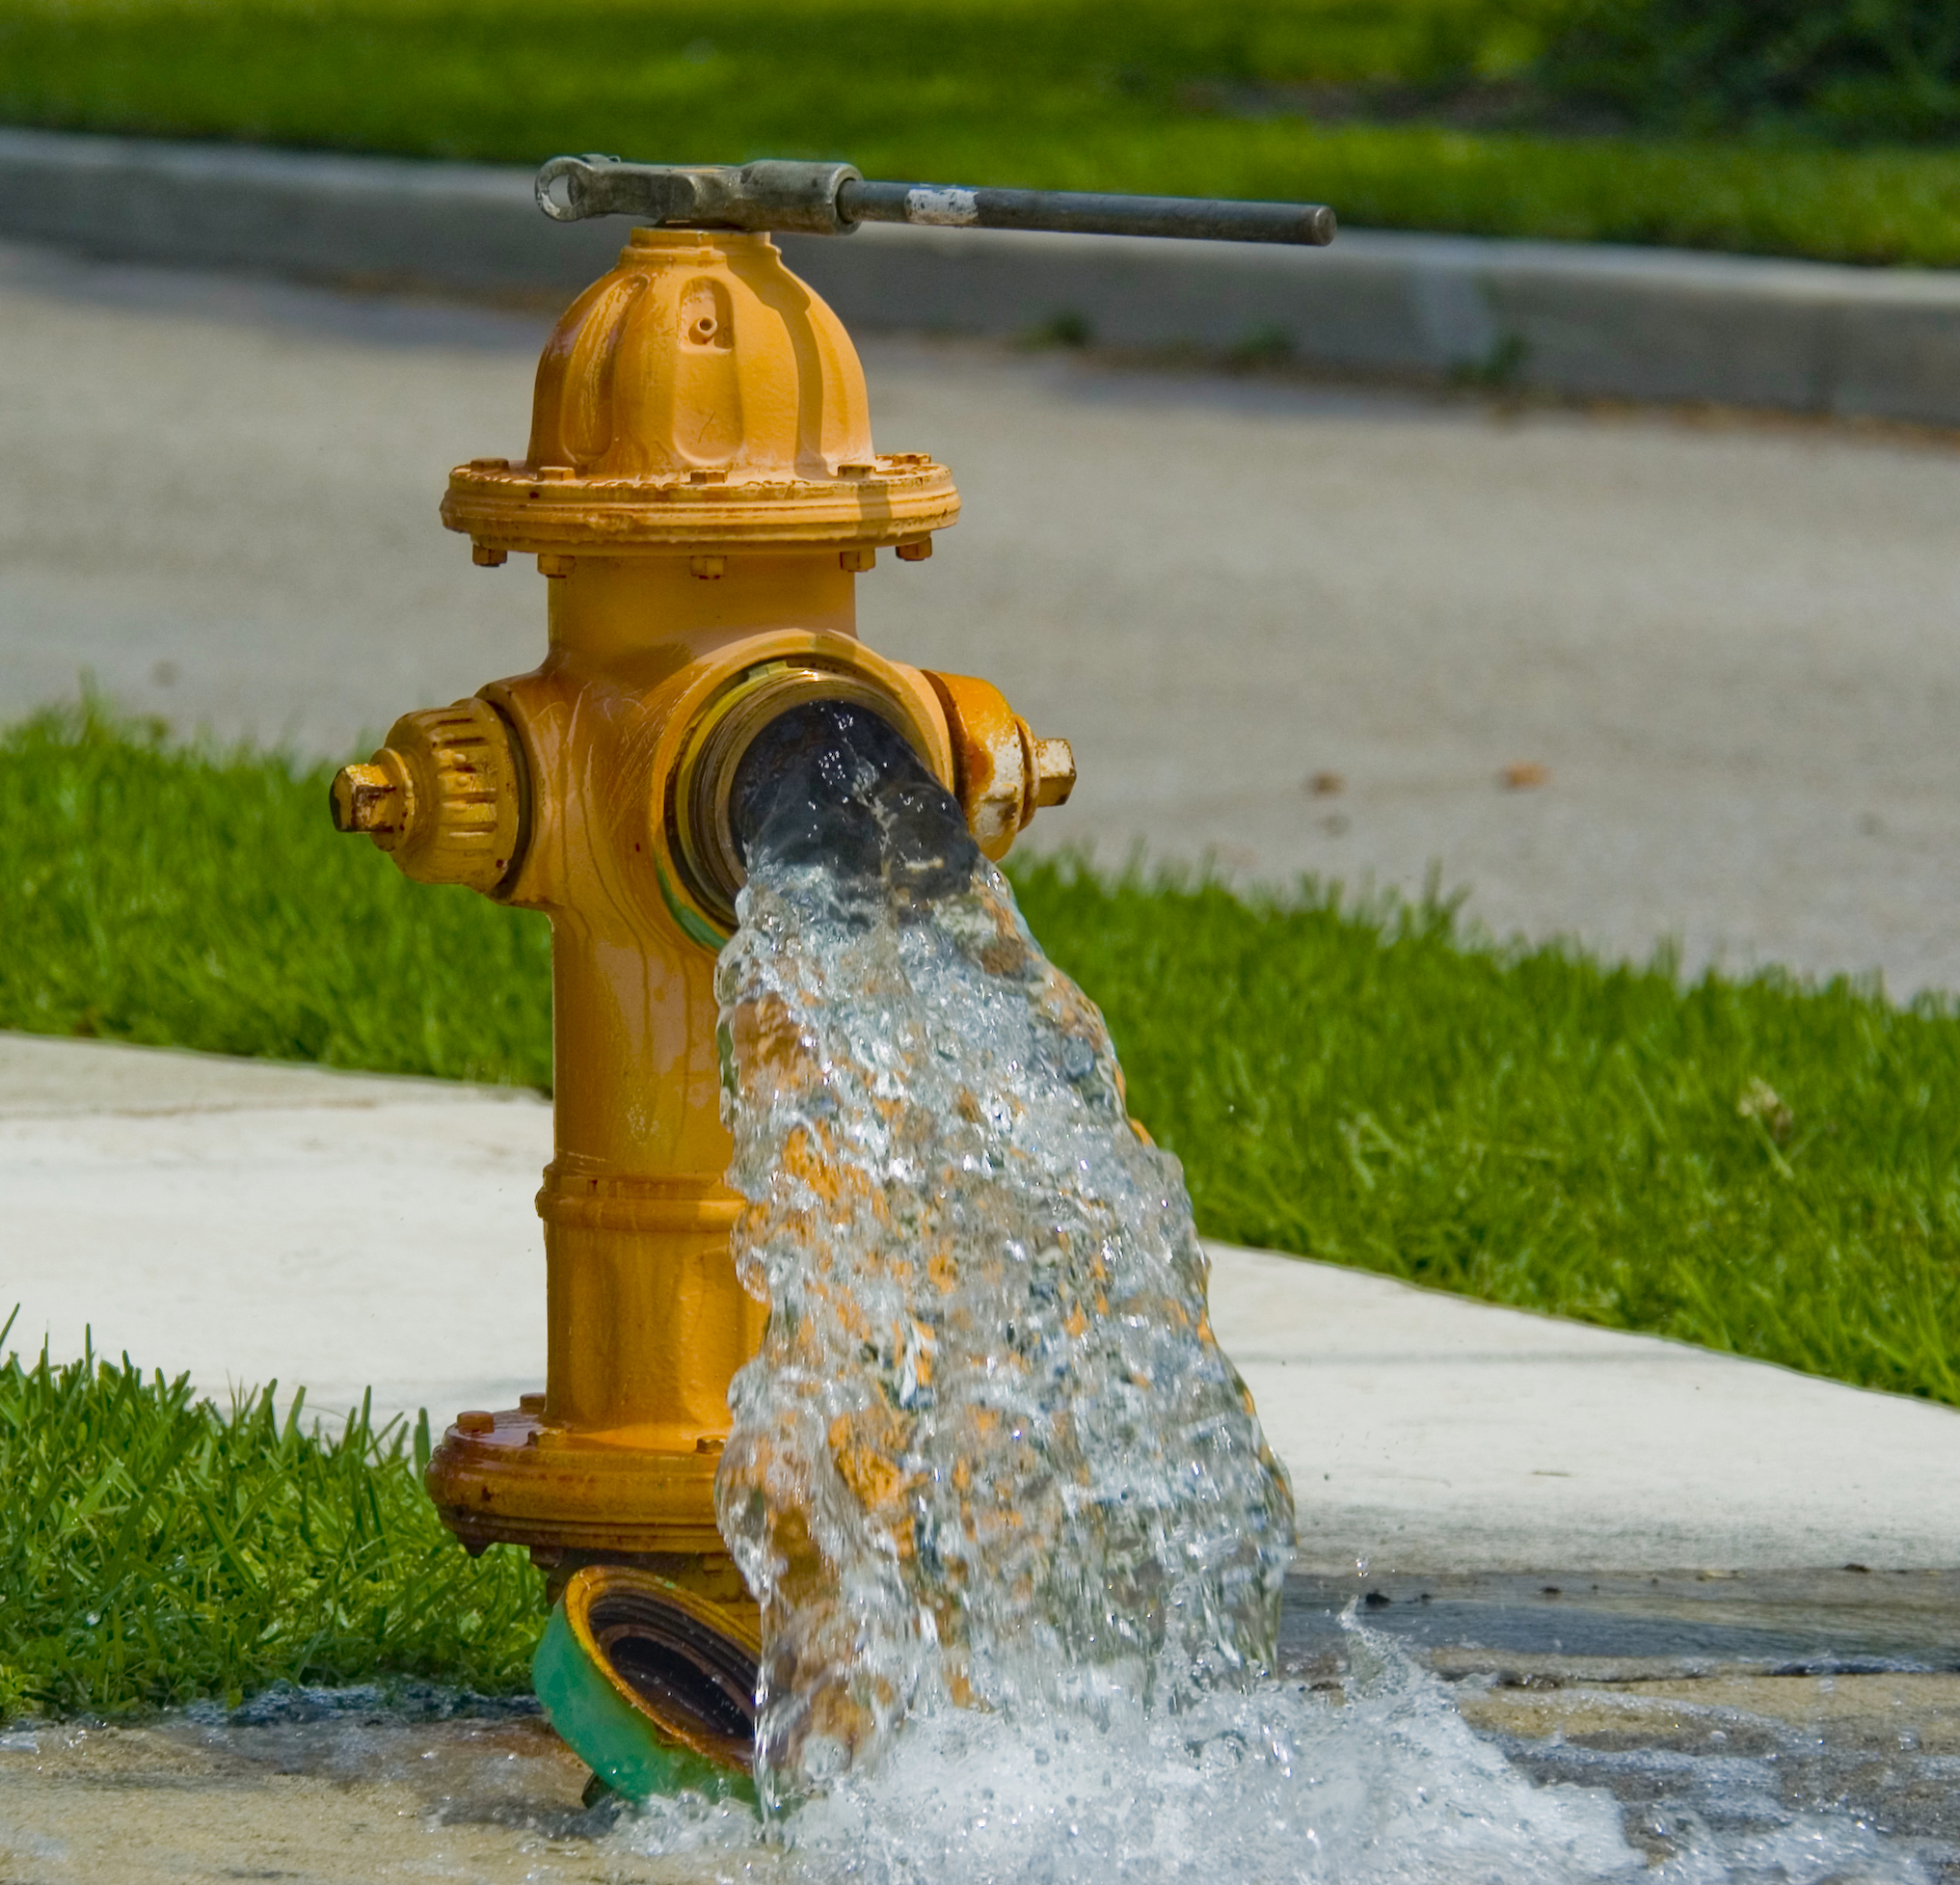 Fire Hydrant Testing | Fire 9 Prevention